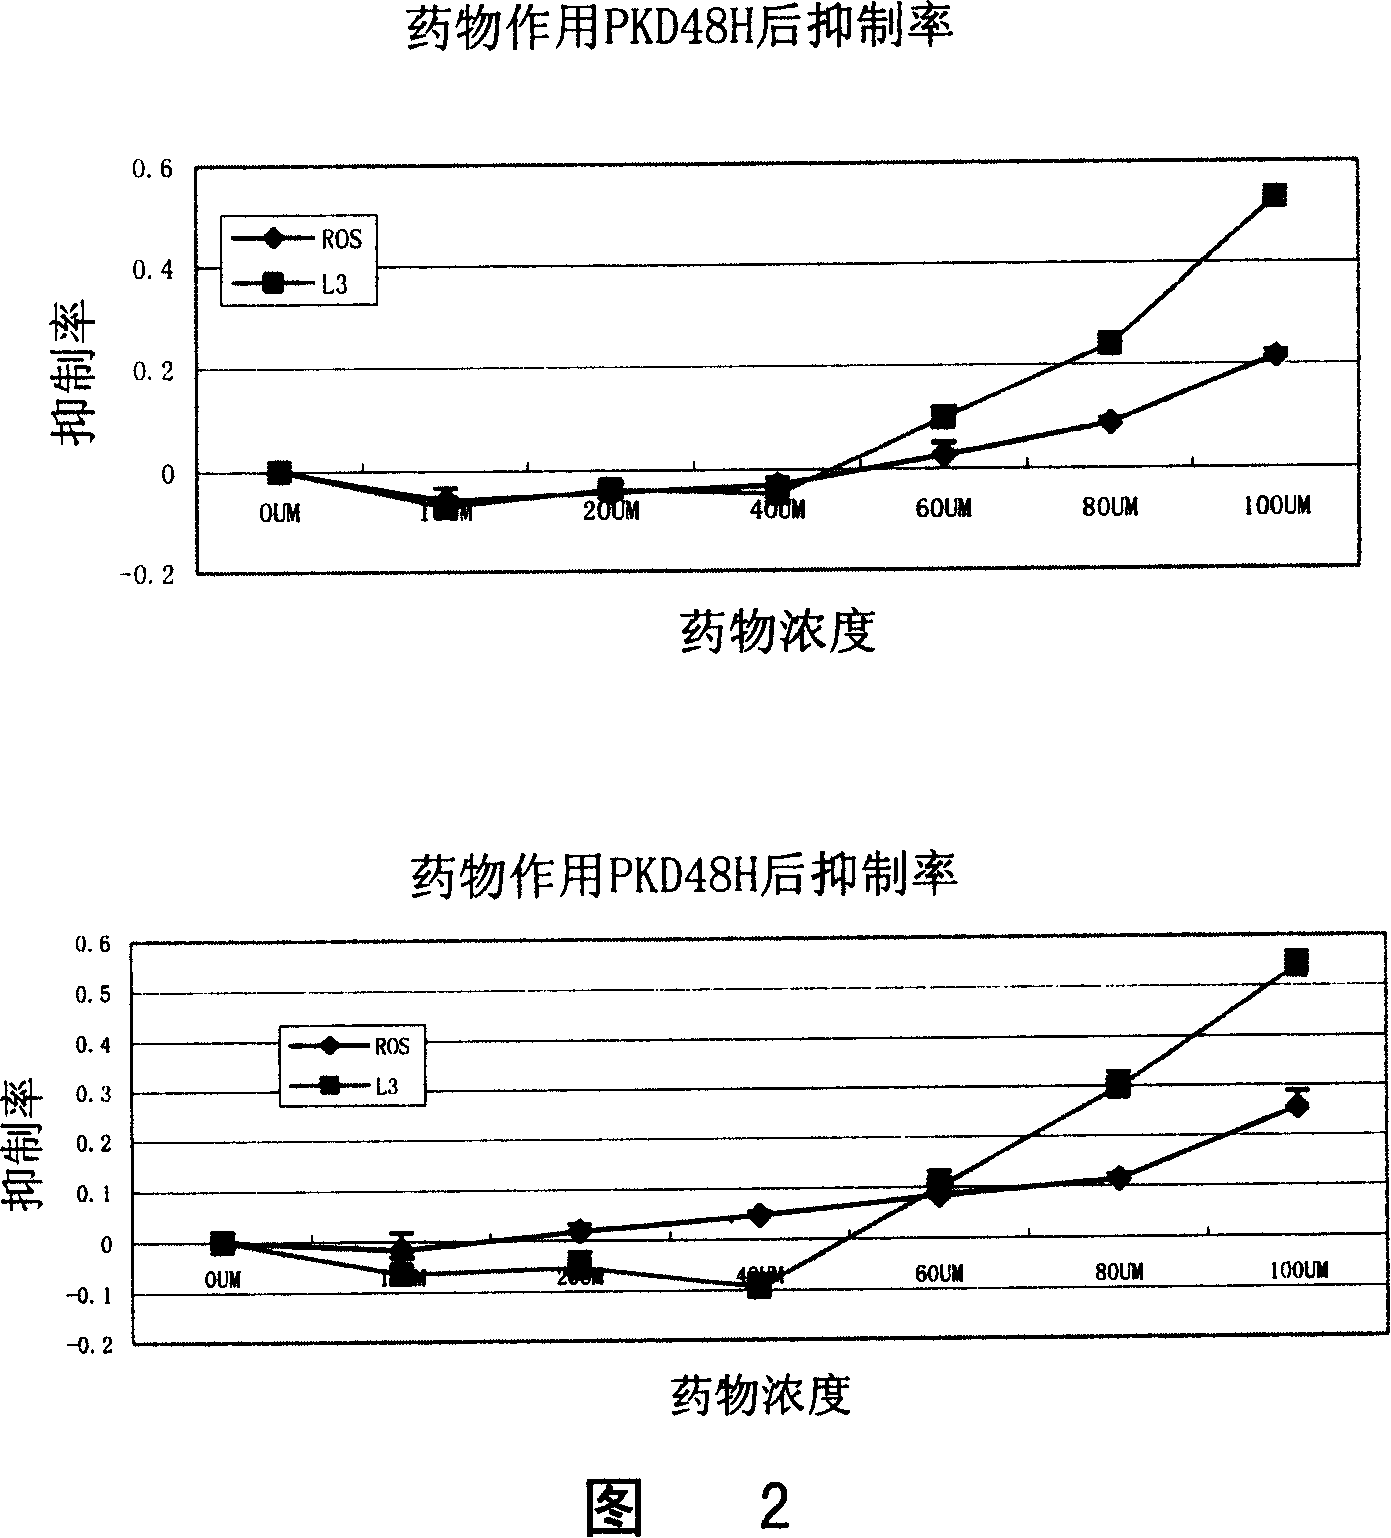 Pyrimidine substituted benzenepropanoic acid derivative, its preparation method and use in curing polycystic kidney disease